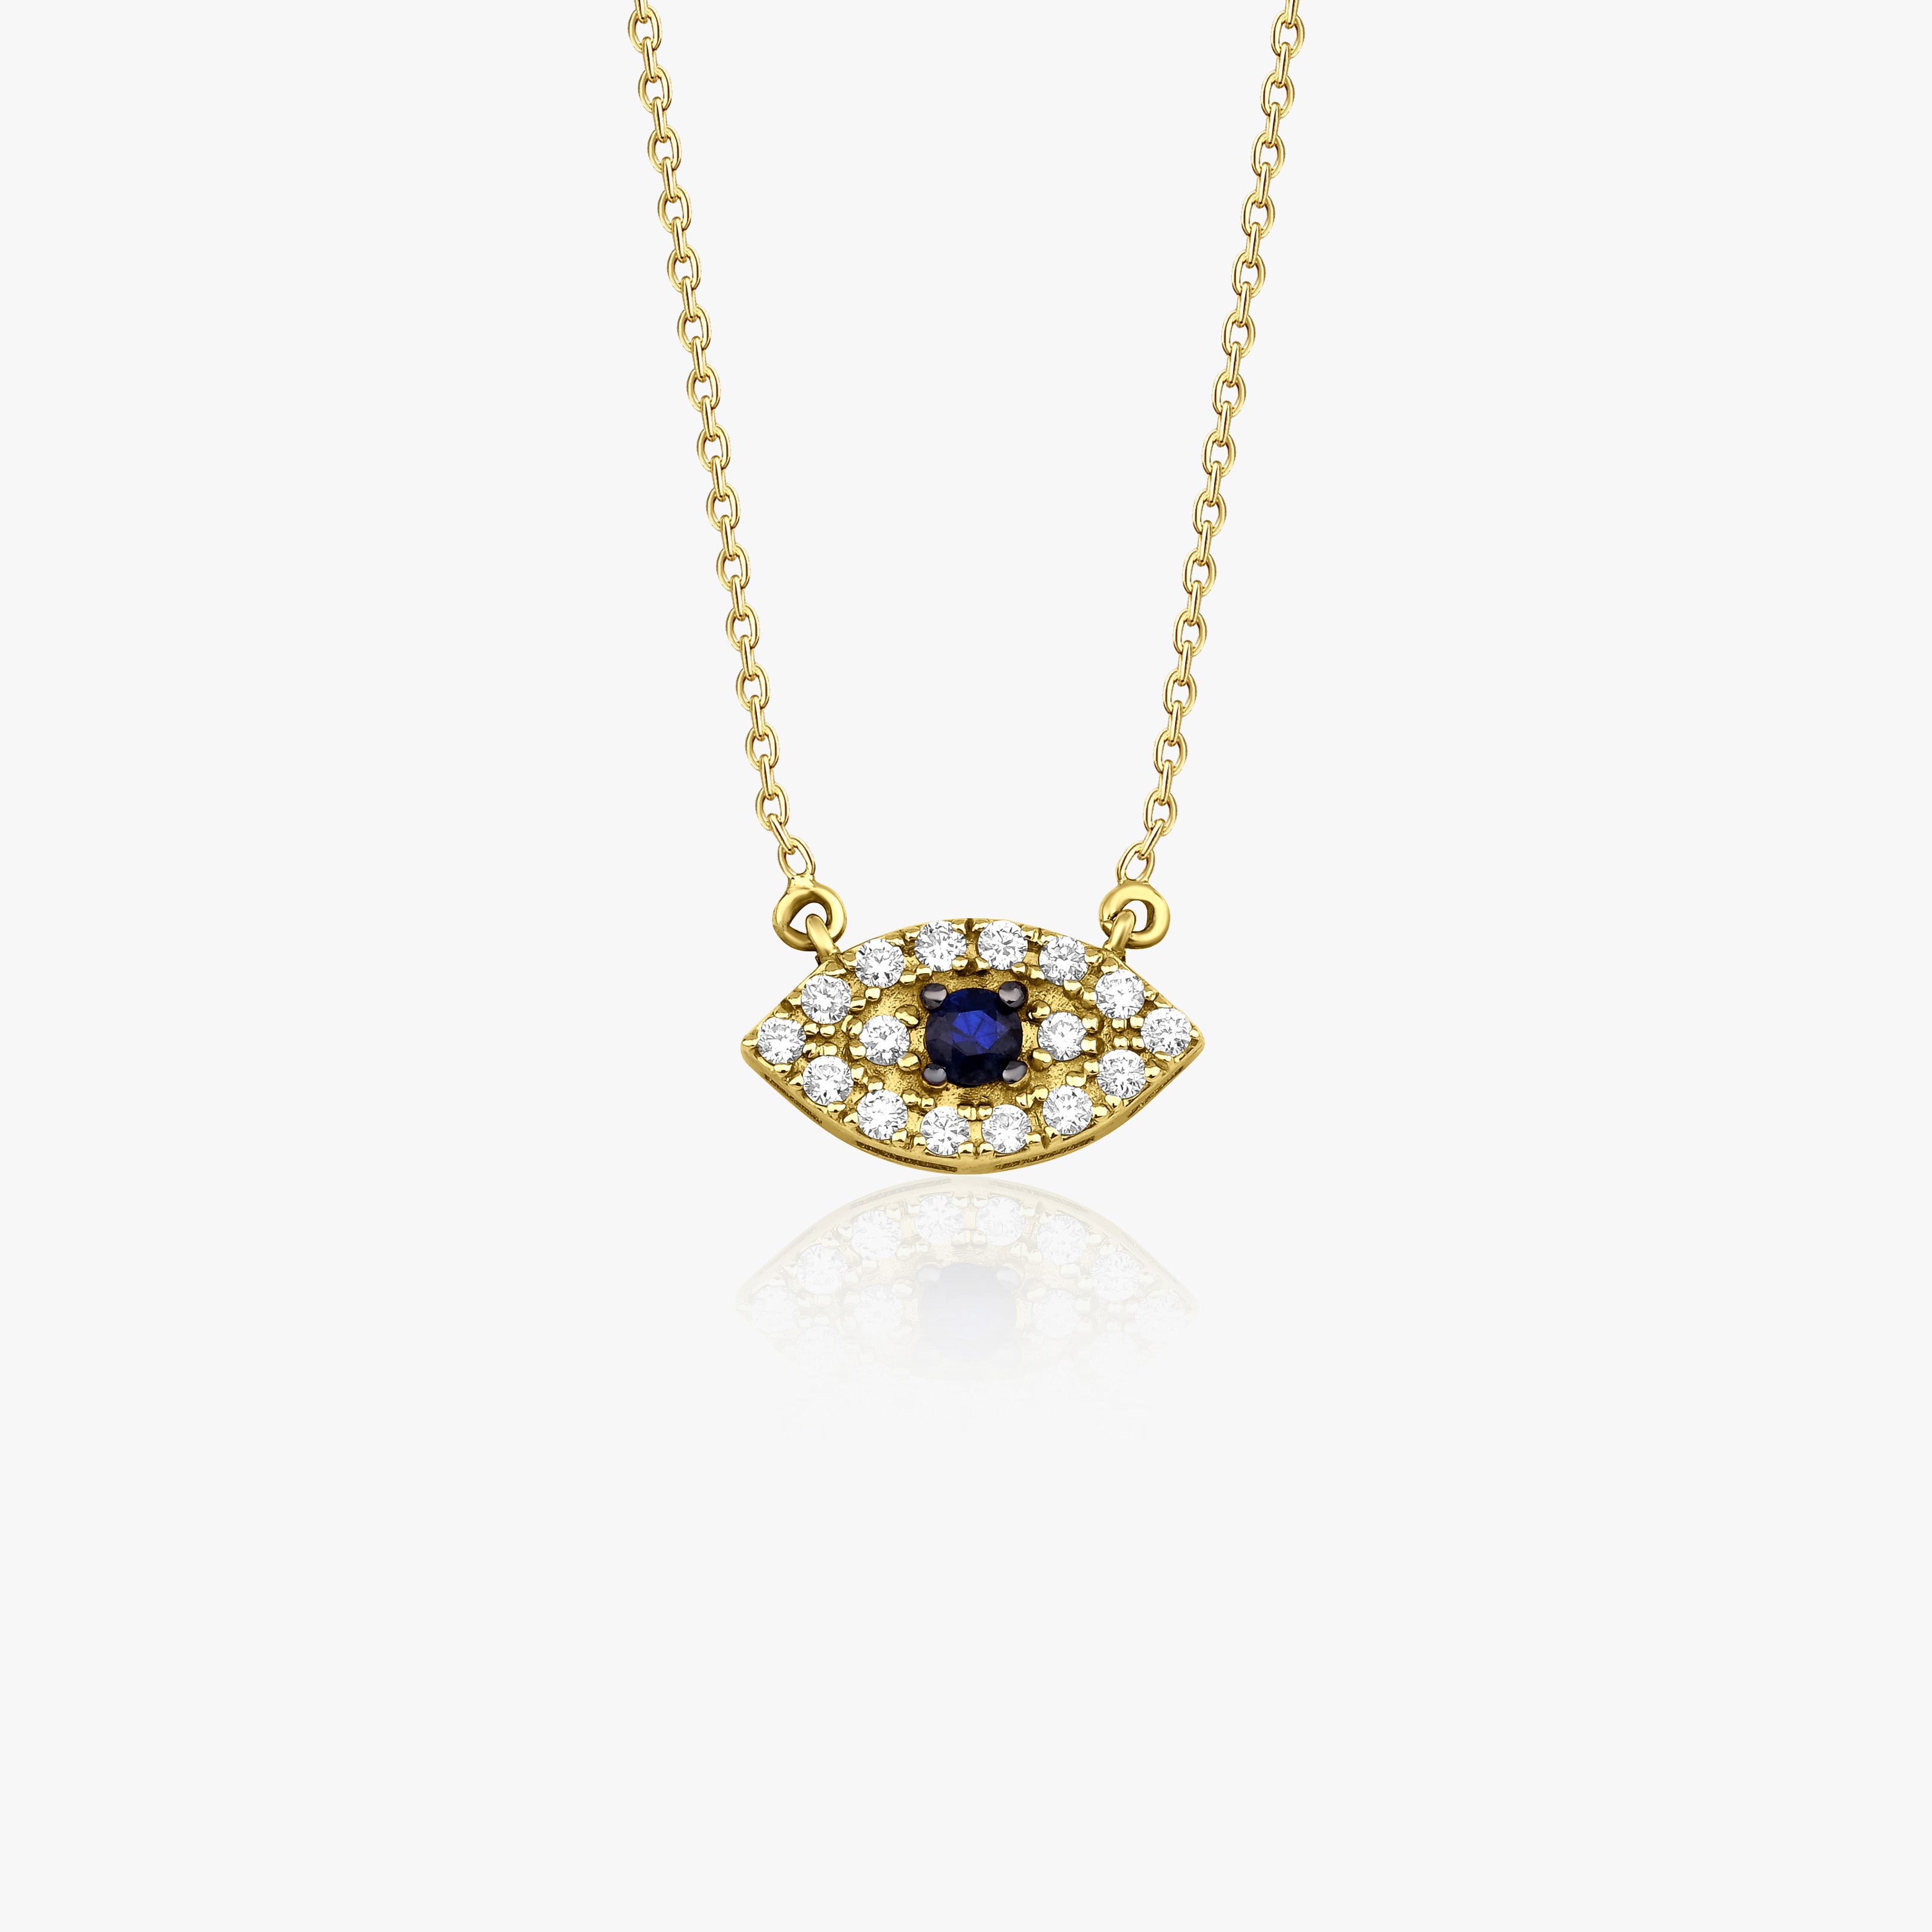 Sapphire and Diamond Evil Eye Necklace Available in 14K and 18K Gold